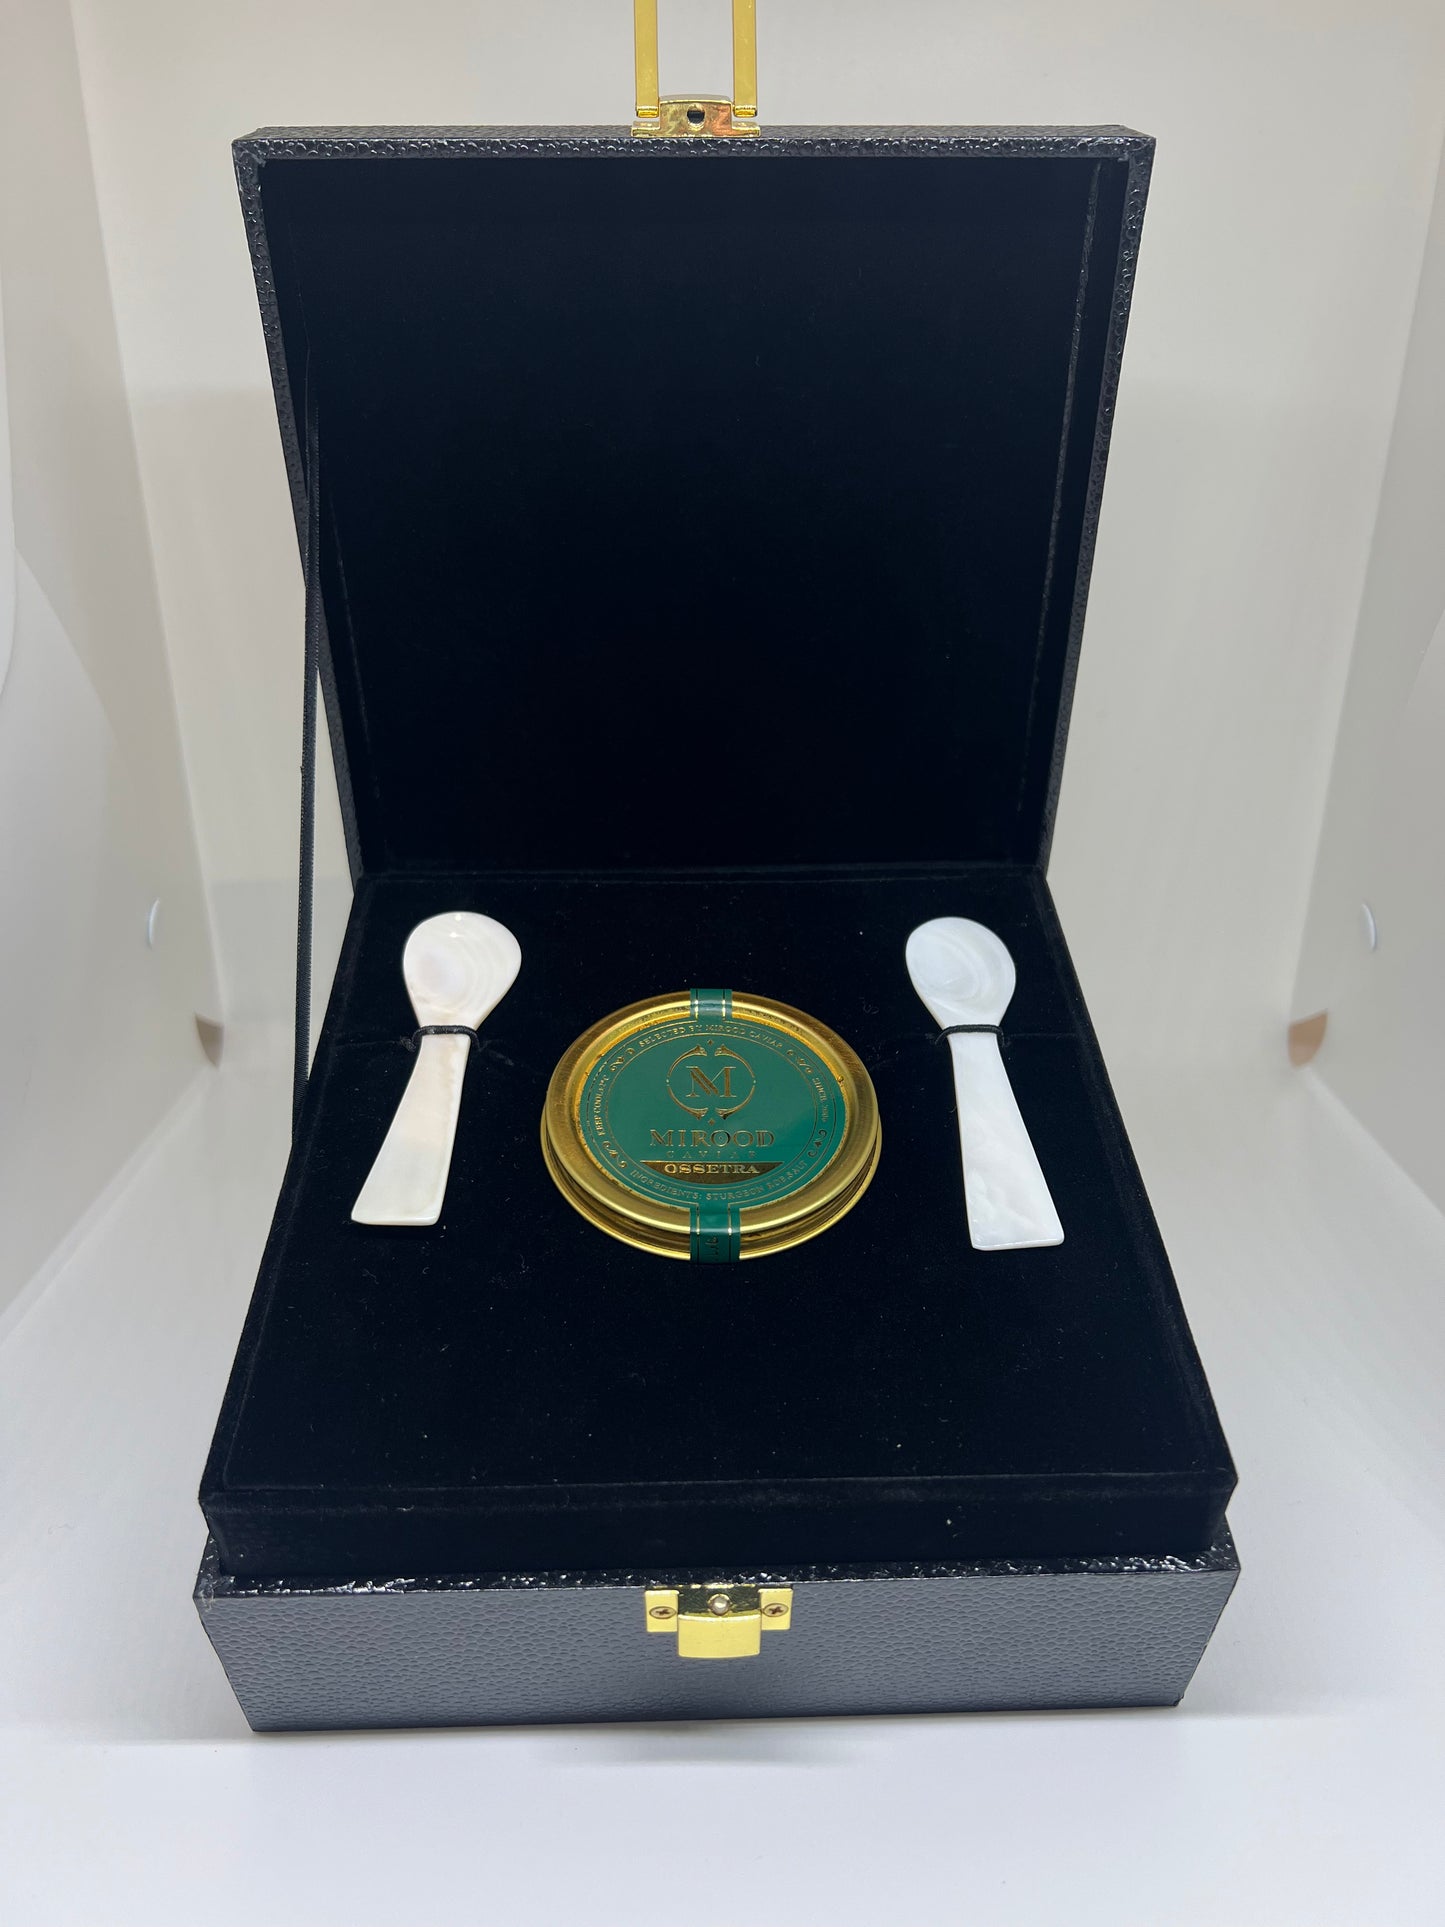 Gift Box:Caspian OSSETRA Sturgeon Caviar with two Mother of Pearl Caviar spoons.